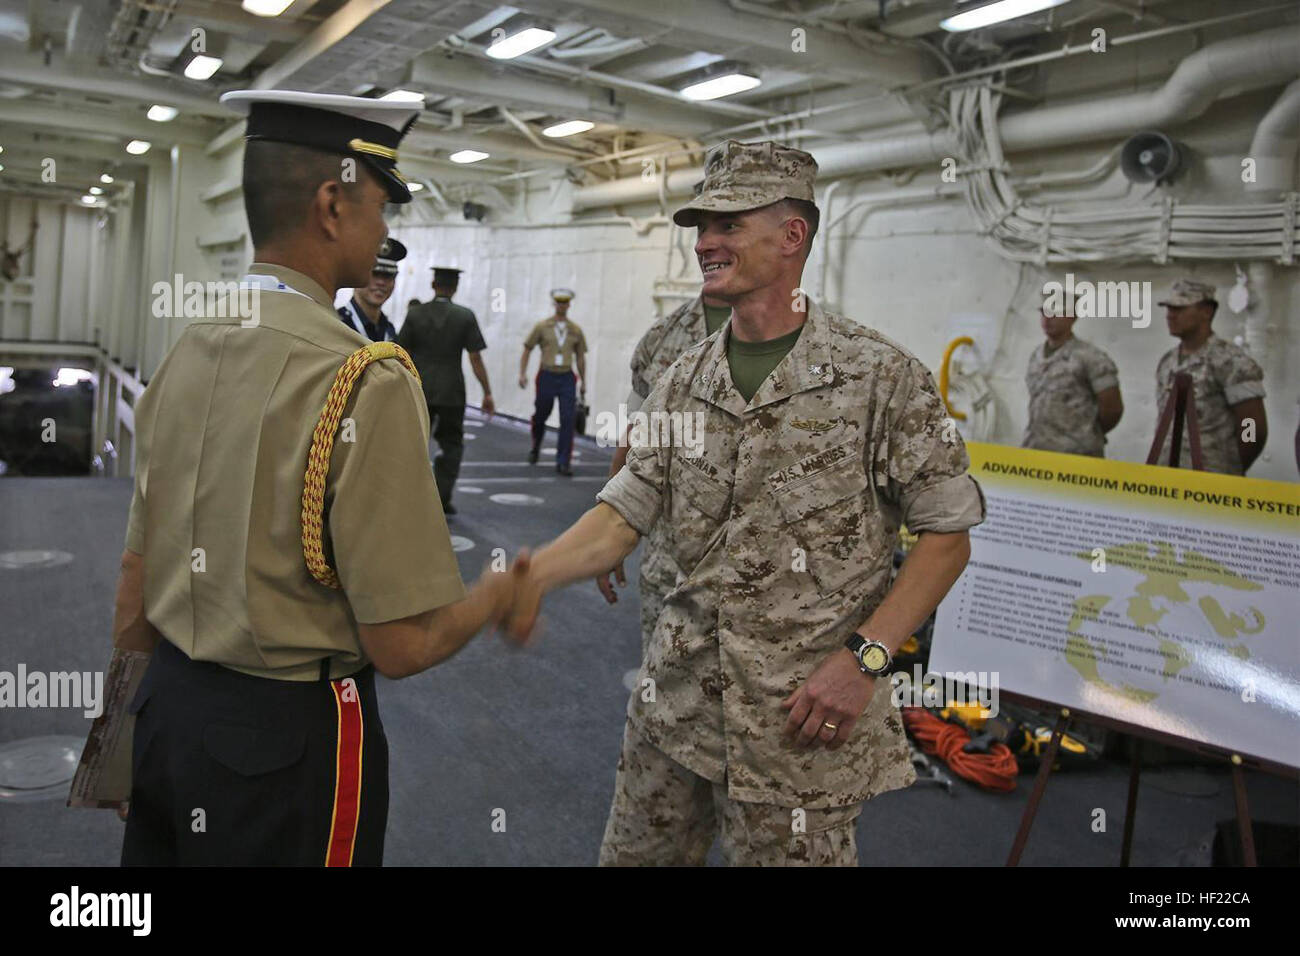 Lieutenant Col. Mark T. Donar, commanding officer, Special Purpose Marine Air-Ground Task Force Association of South East Asian Nations, greets an official with the Philippine Marine Corps during a static display aboard amphibious transport dock ship USS Anchorage (LPD 23) in support of the ASEAN conference held by U.S. Secretary of Defense Chuck Hagel in Hawaii, April 2, 2014. Delegates and media personnel, from 10 Southeast Asian countries, attended the exhibit to learn more about the Navy and Marine Corps' humanitarian aid and disaster relief capabilities. As subject matter experts with fir Stock Photo